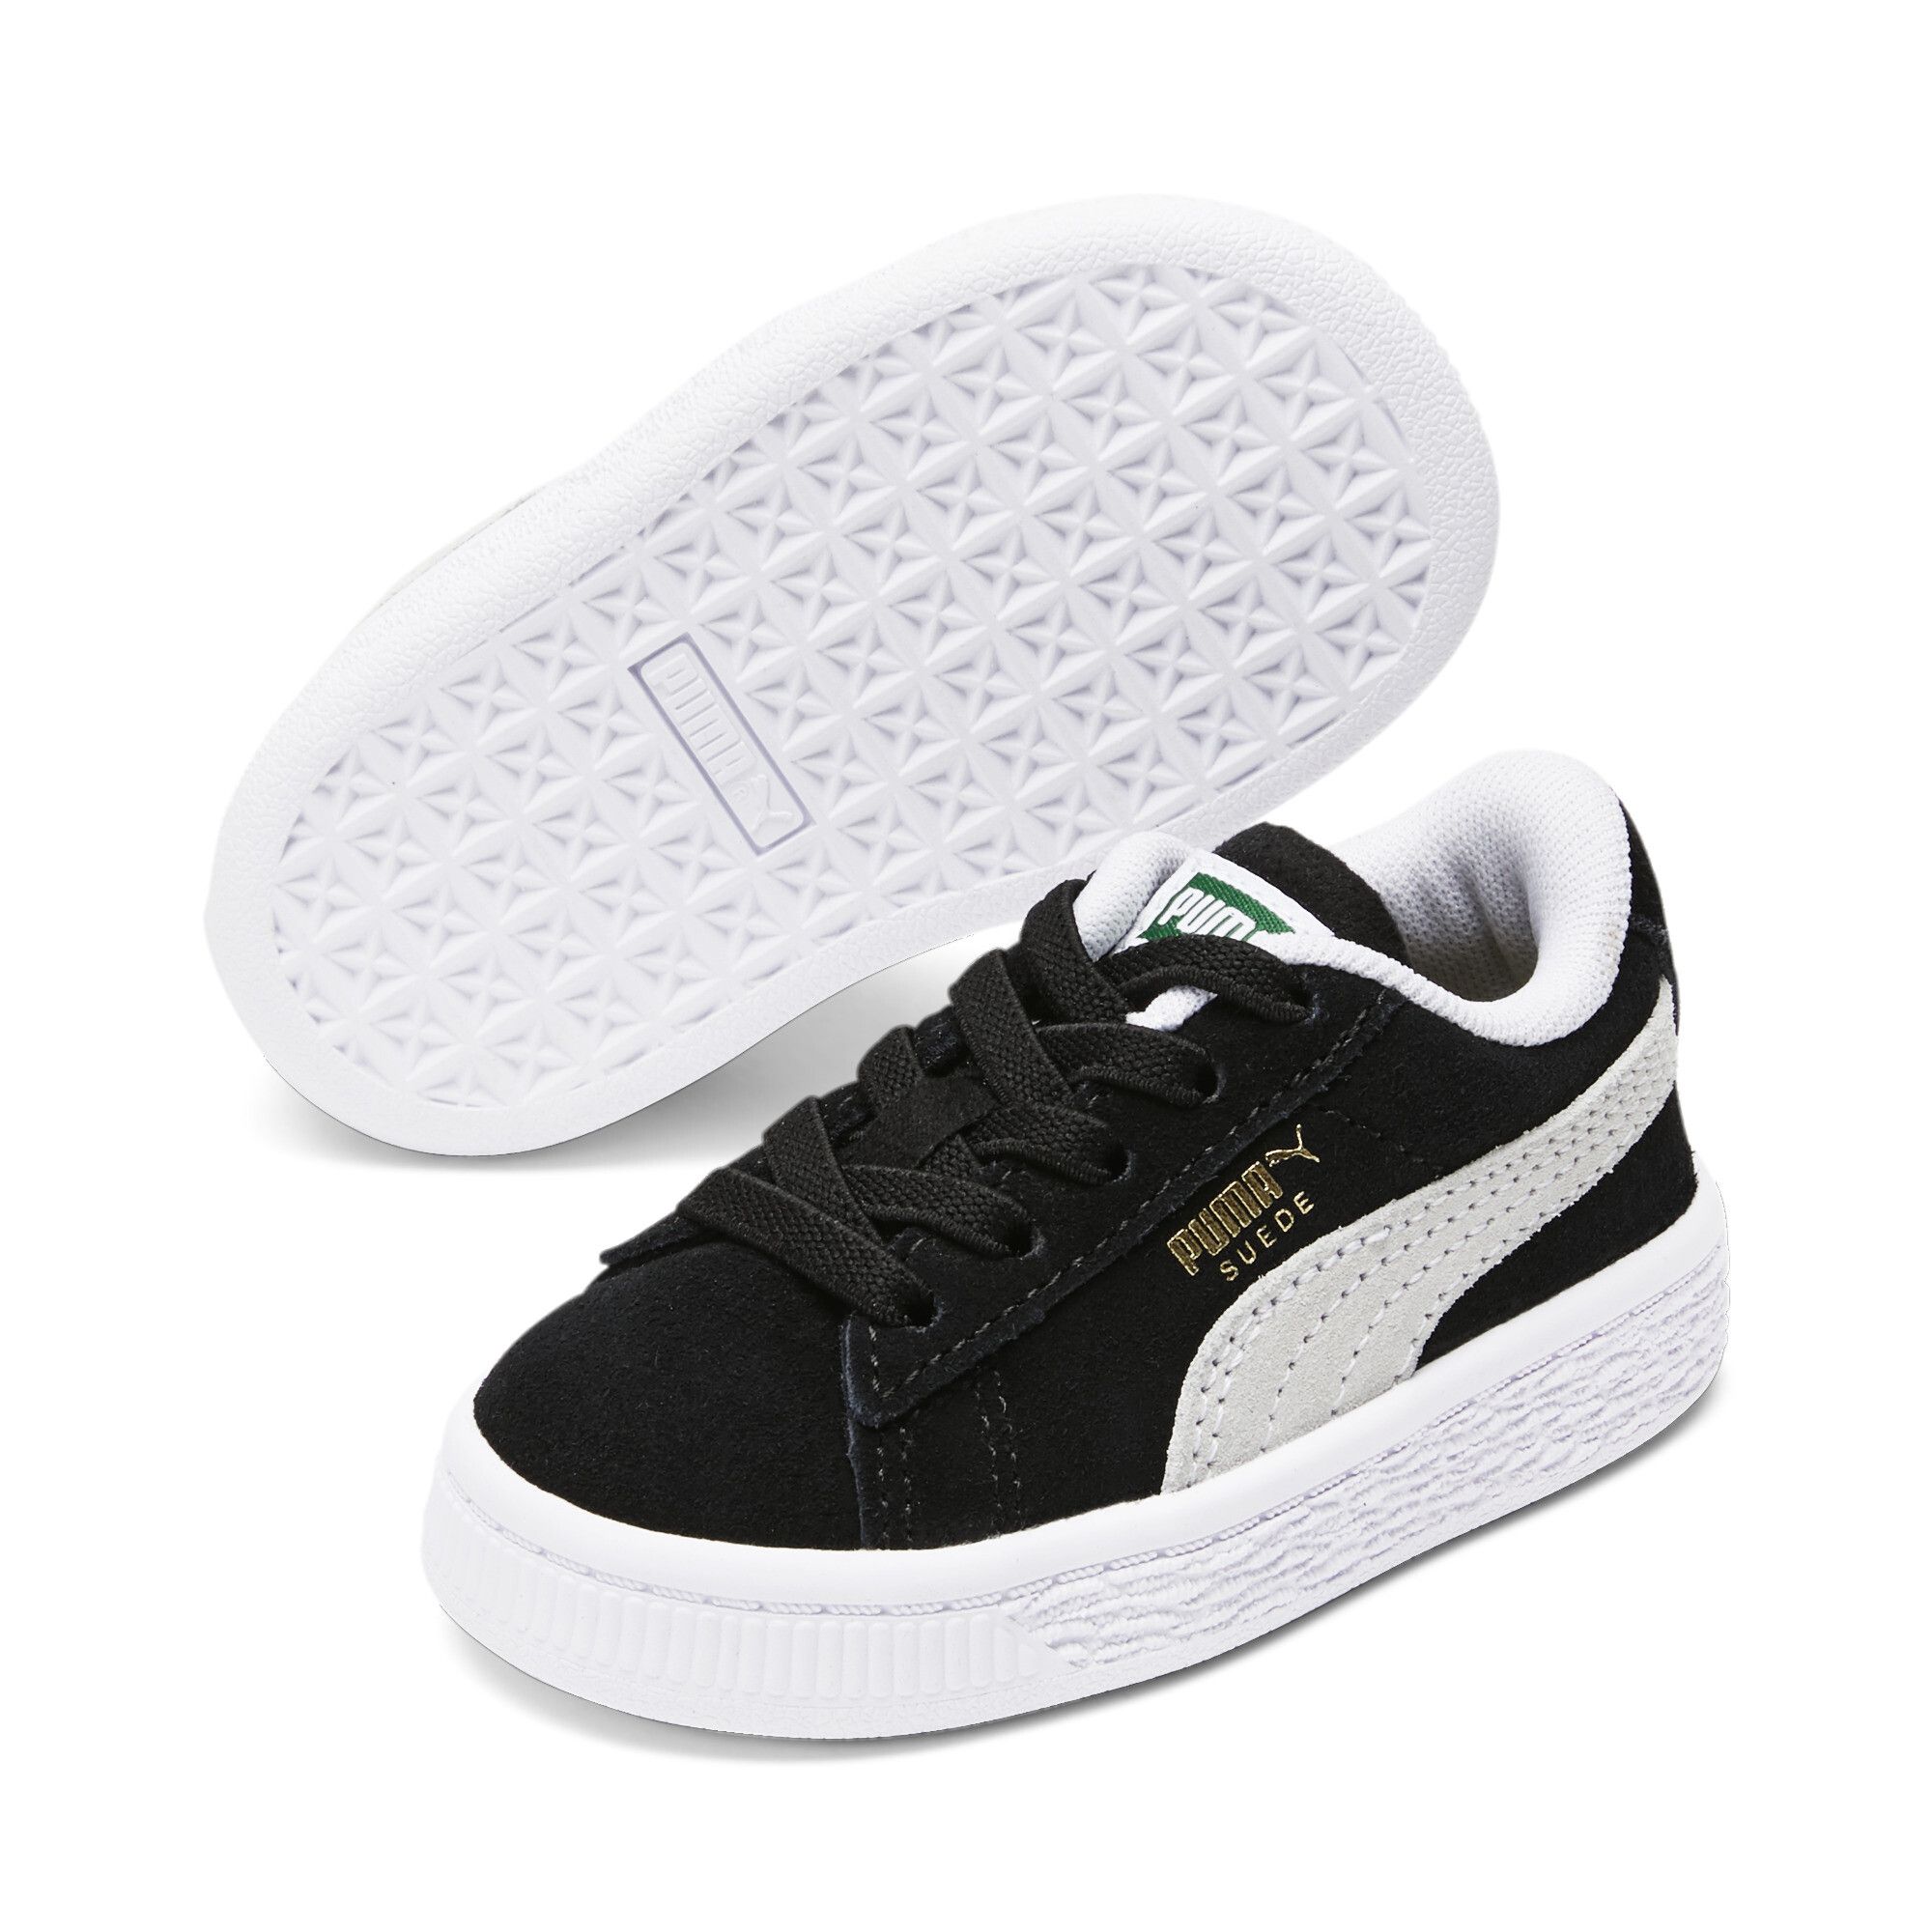 307 pairs of Puma Suede sneakers released for 